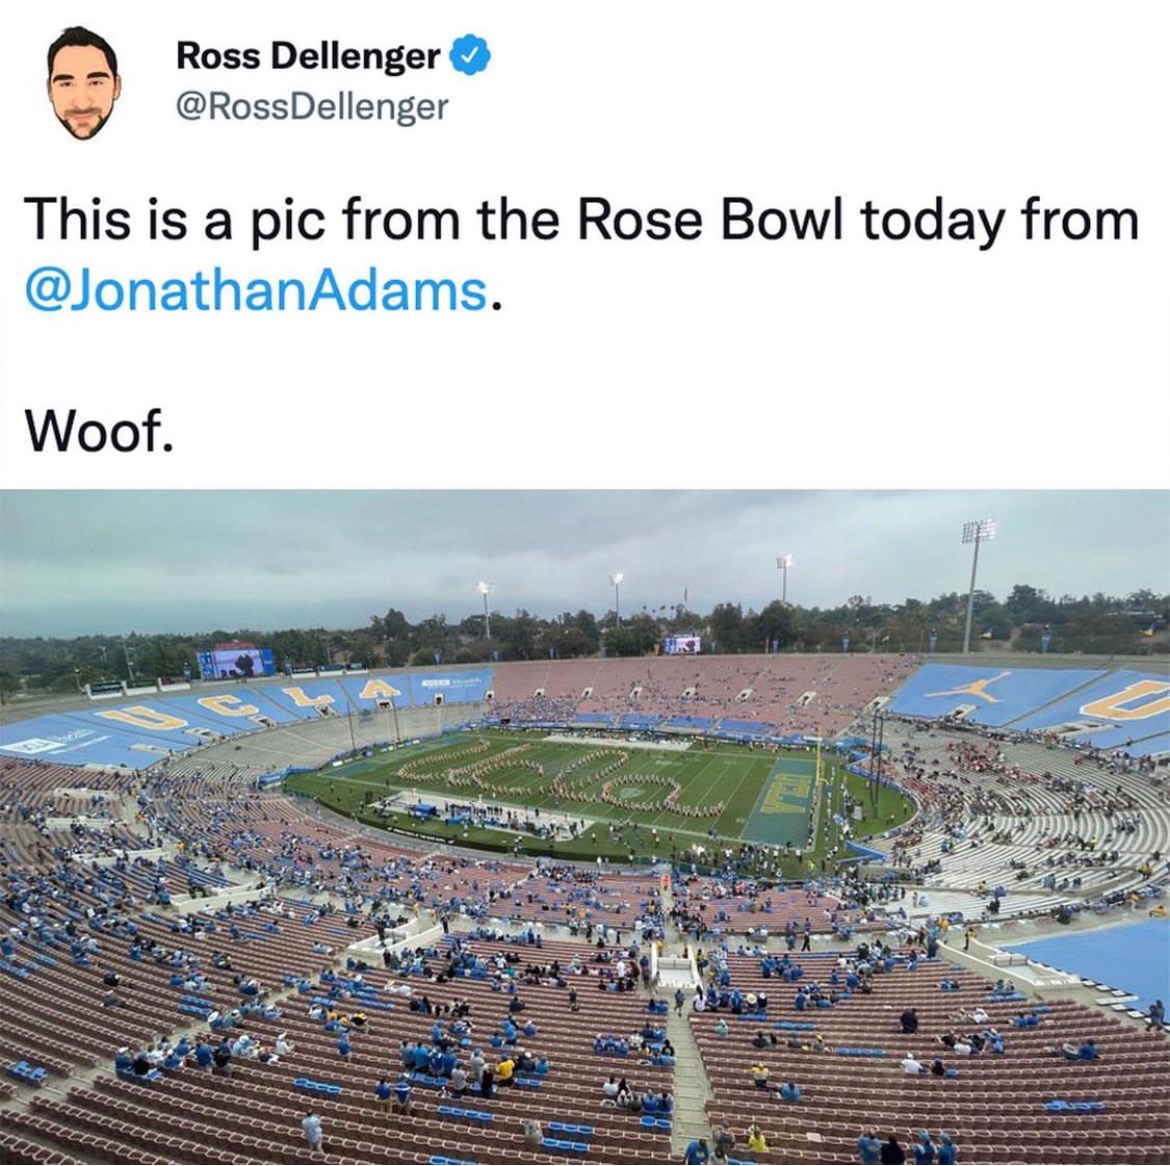 This is an embarrassment but we couldn’t fill the Rose Bowl in 1988 when we were the #1 team in the country. Anyone else at UCLA think it’s time for an on-campus 30,000 seat stadium? Of course, if we can’t play better than we did today, it would be half-empty too.